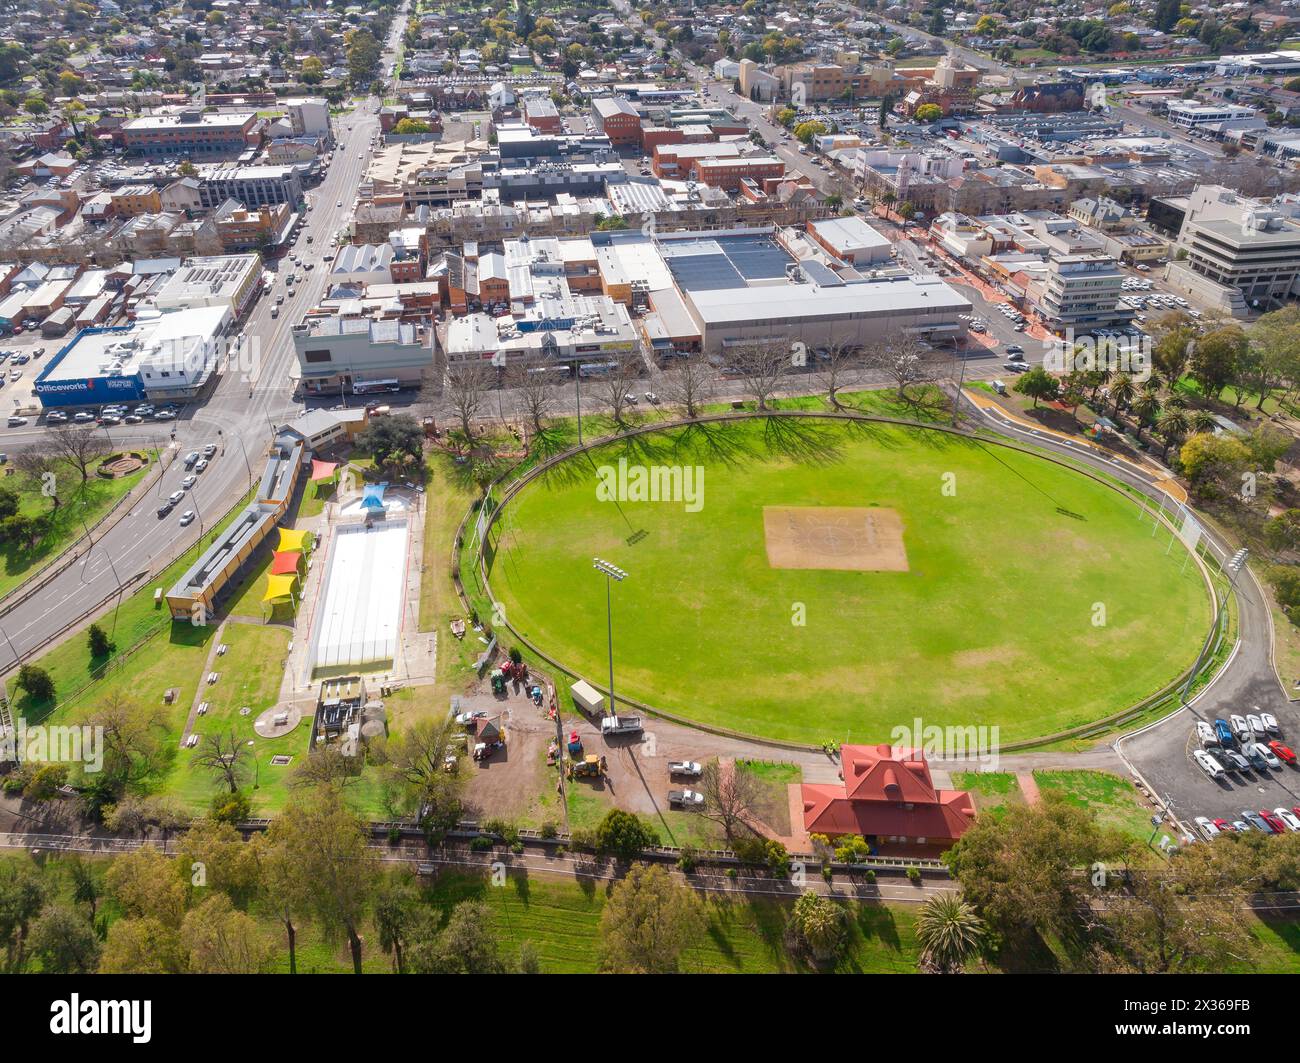 Aerial view of a sports oval alongside a the city centre of Tamworth in New South Wales, Australia. Stock Photo